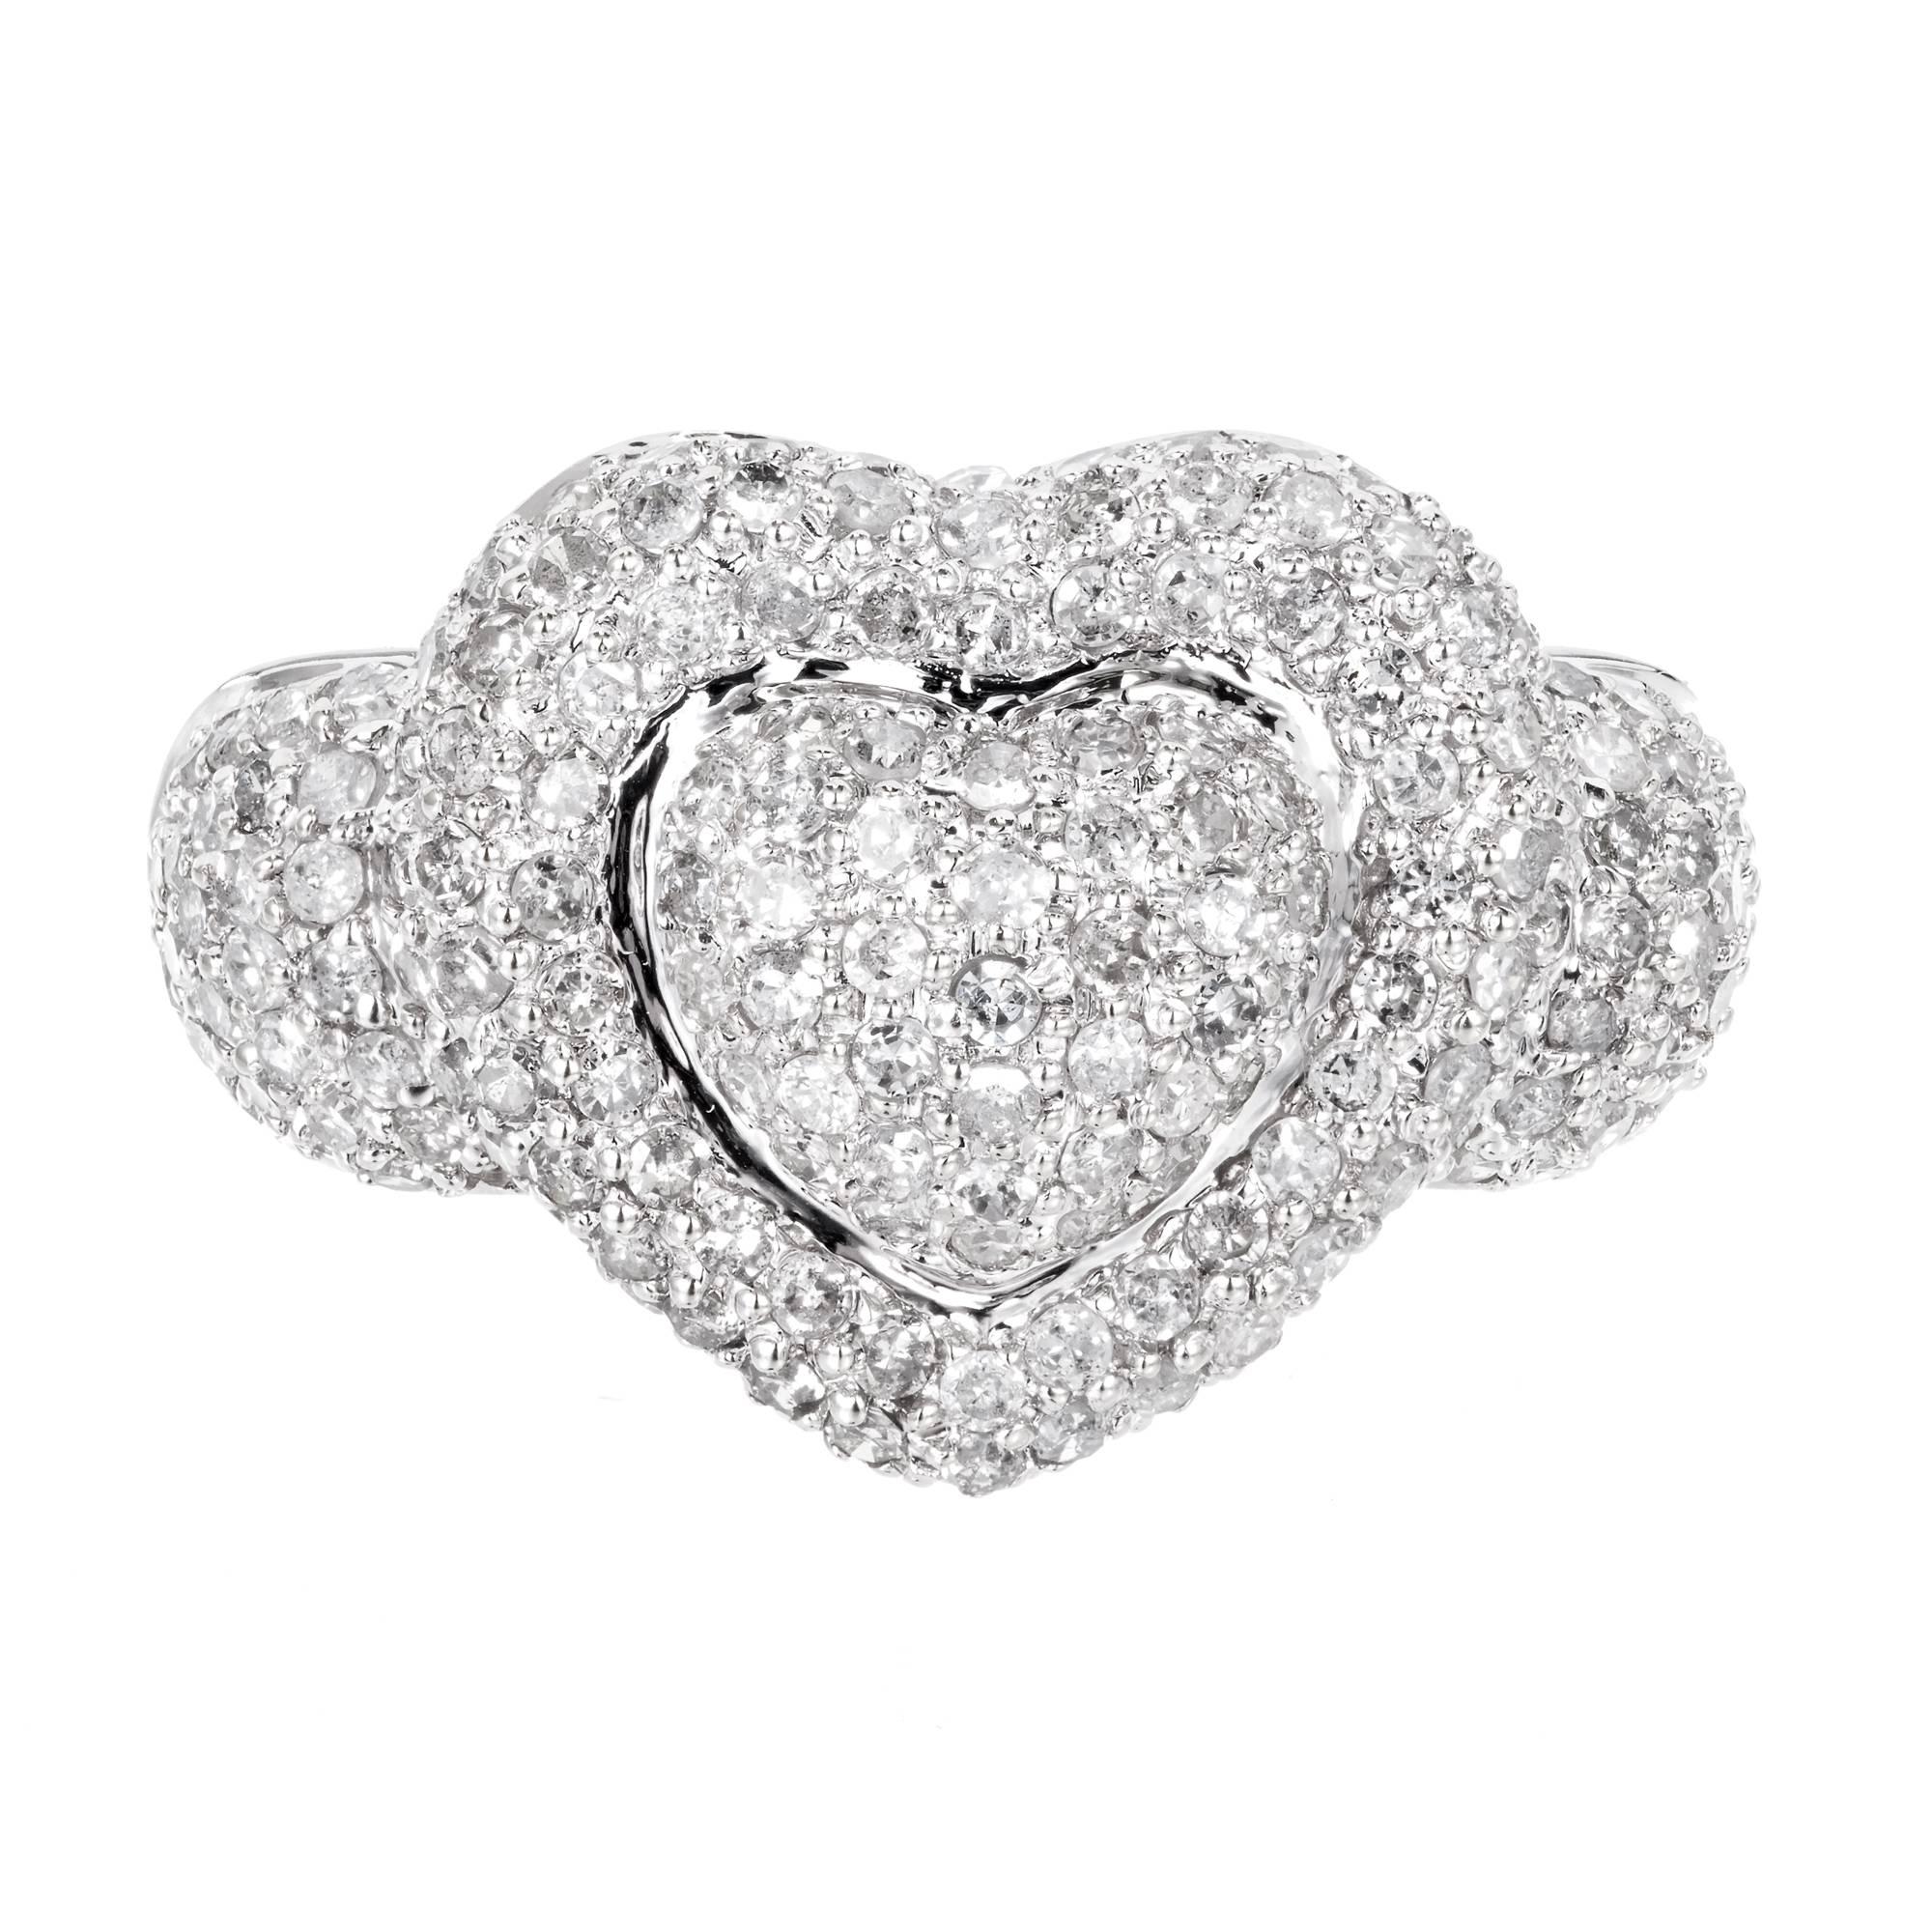 2.75 Carat Domed Diamond White Gold Heart Cocktail Ring